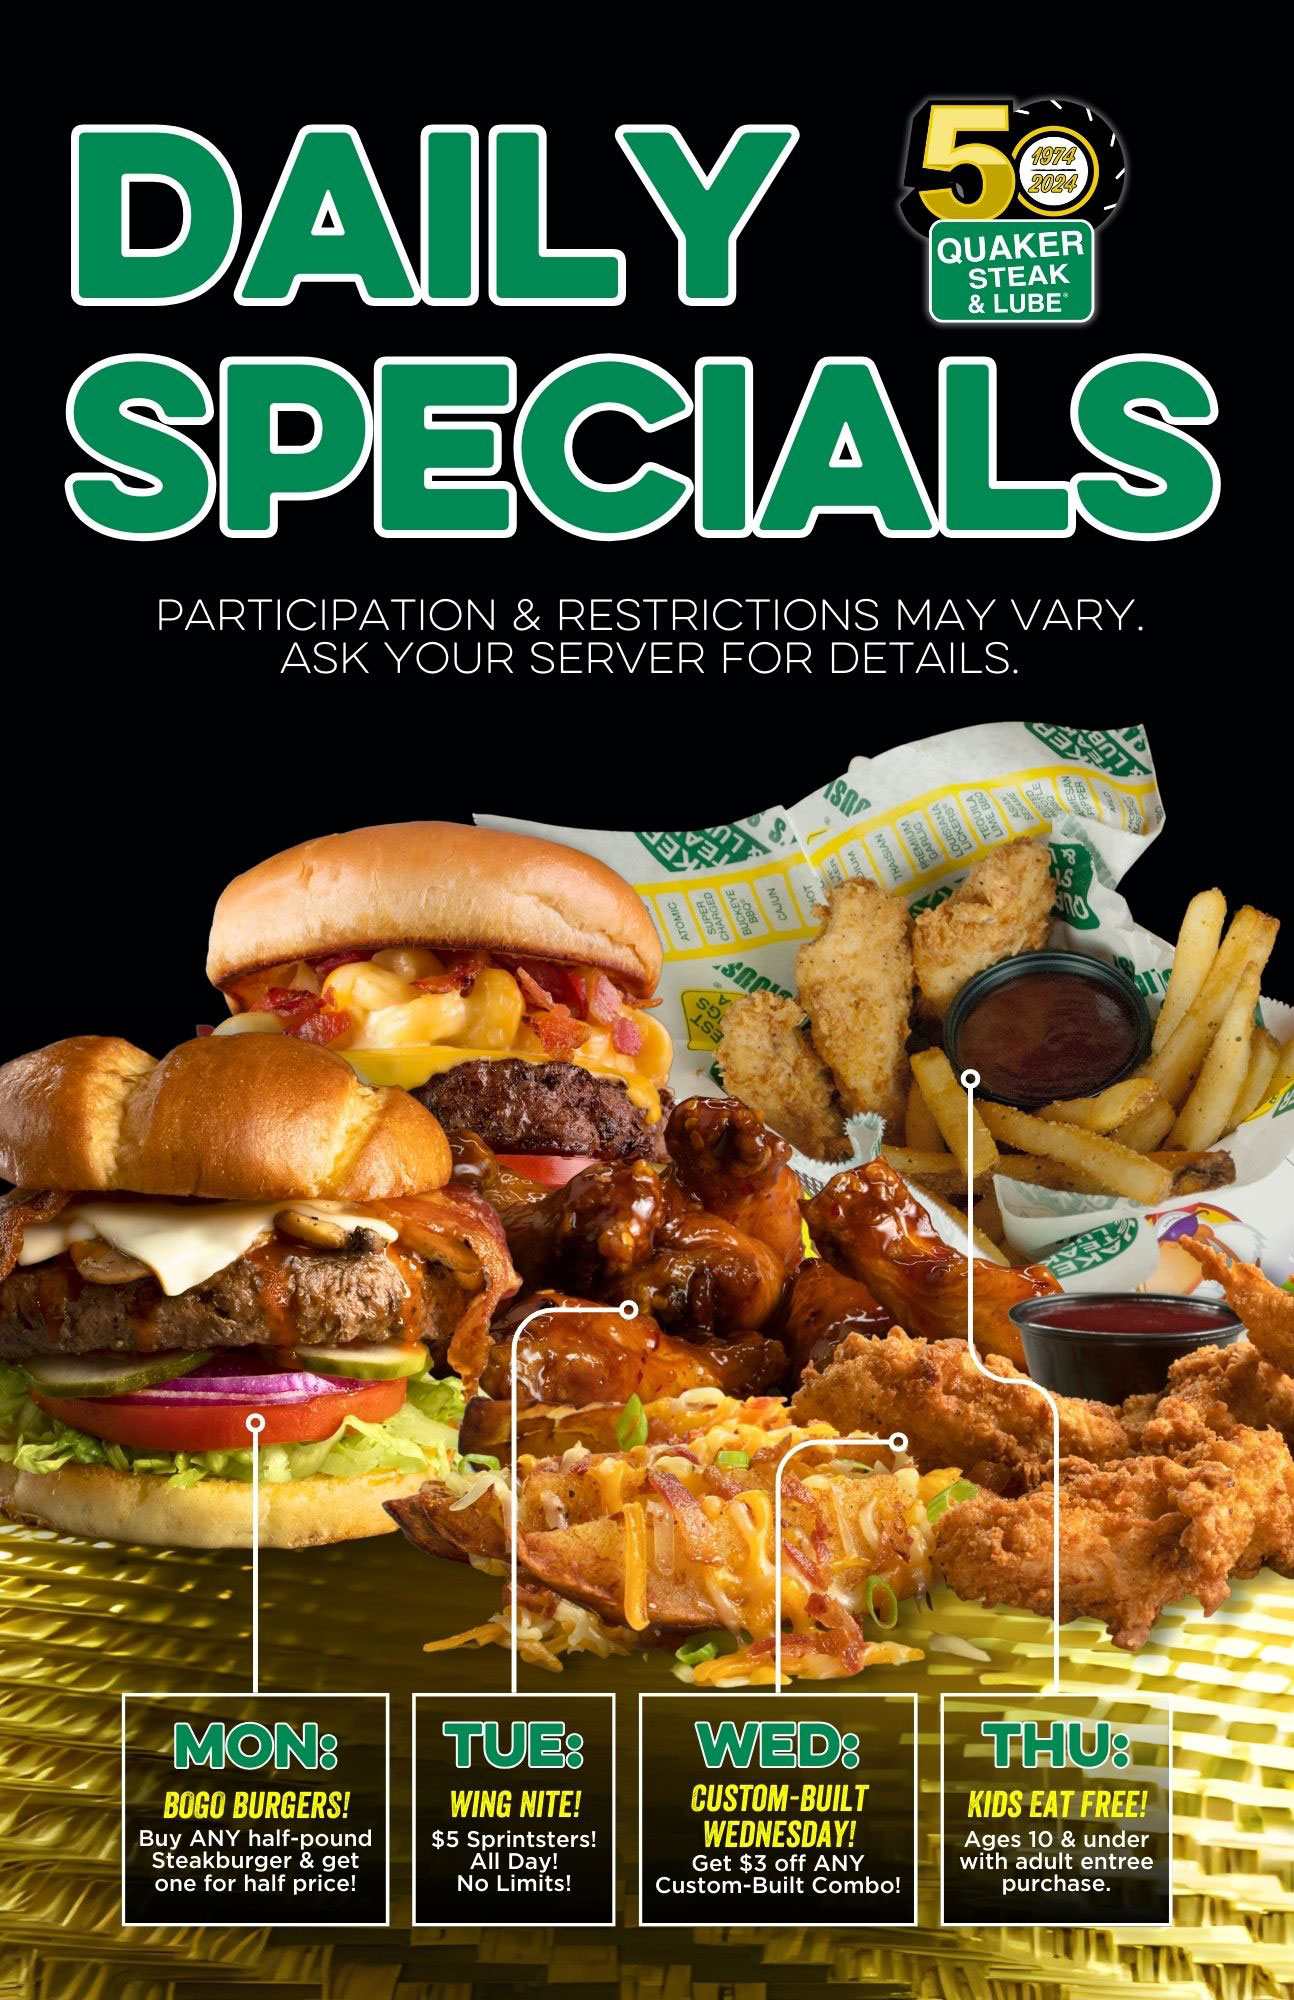 Daily Specials At the Quaker Steak & Lube State College Restaurant